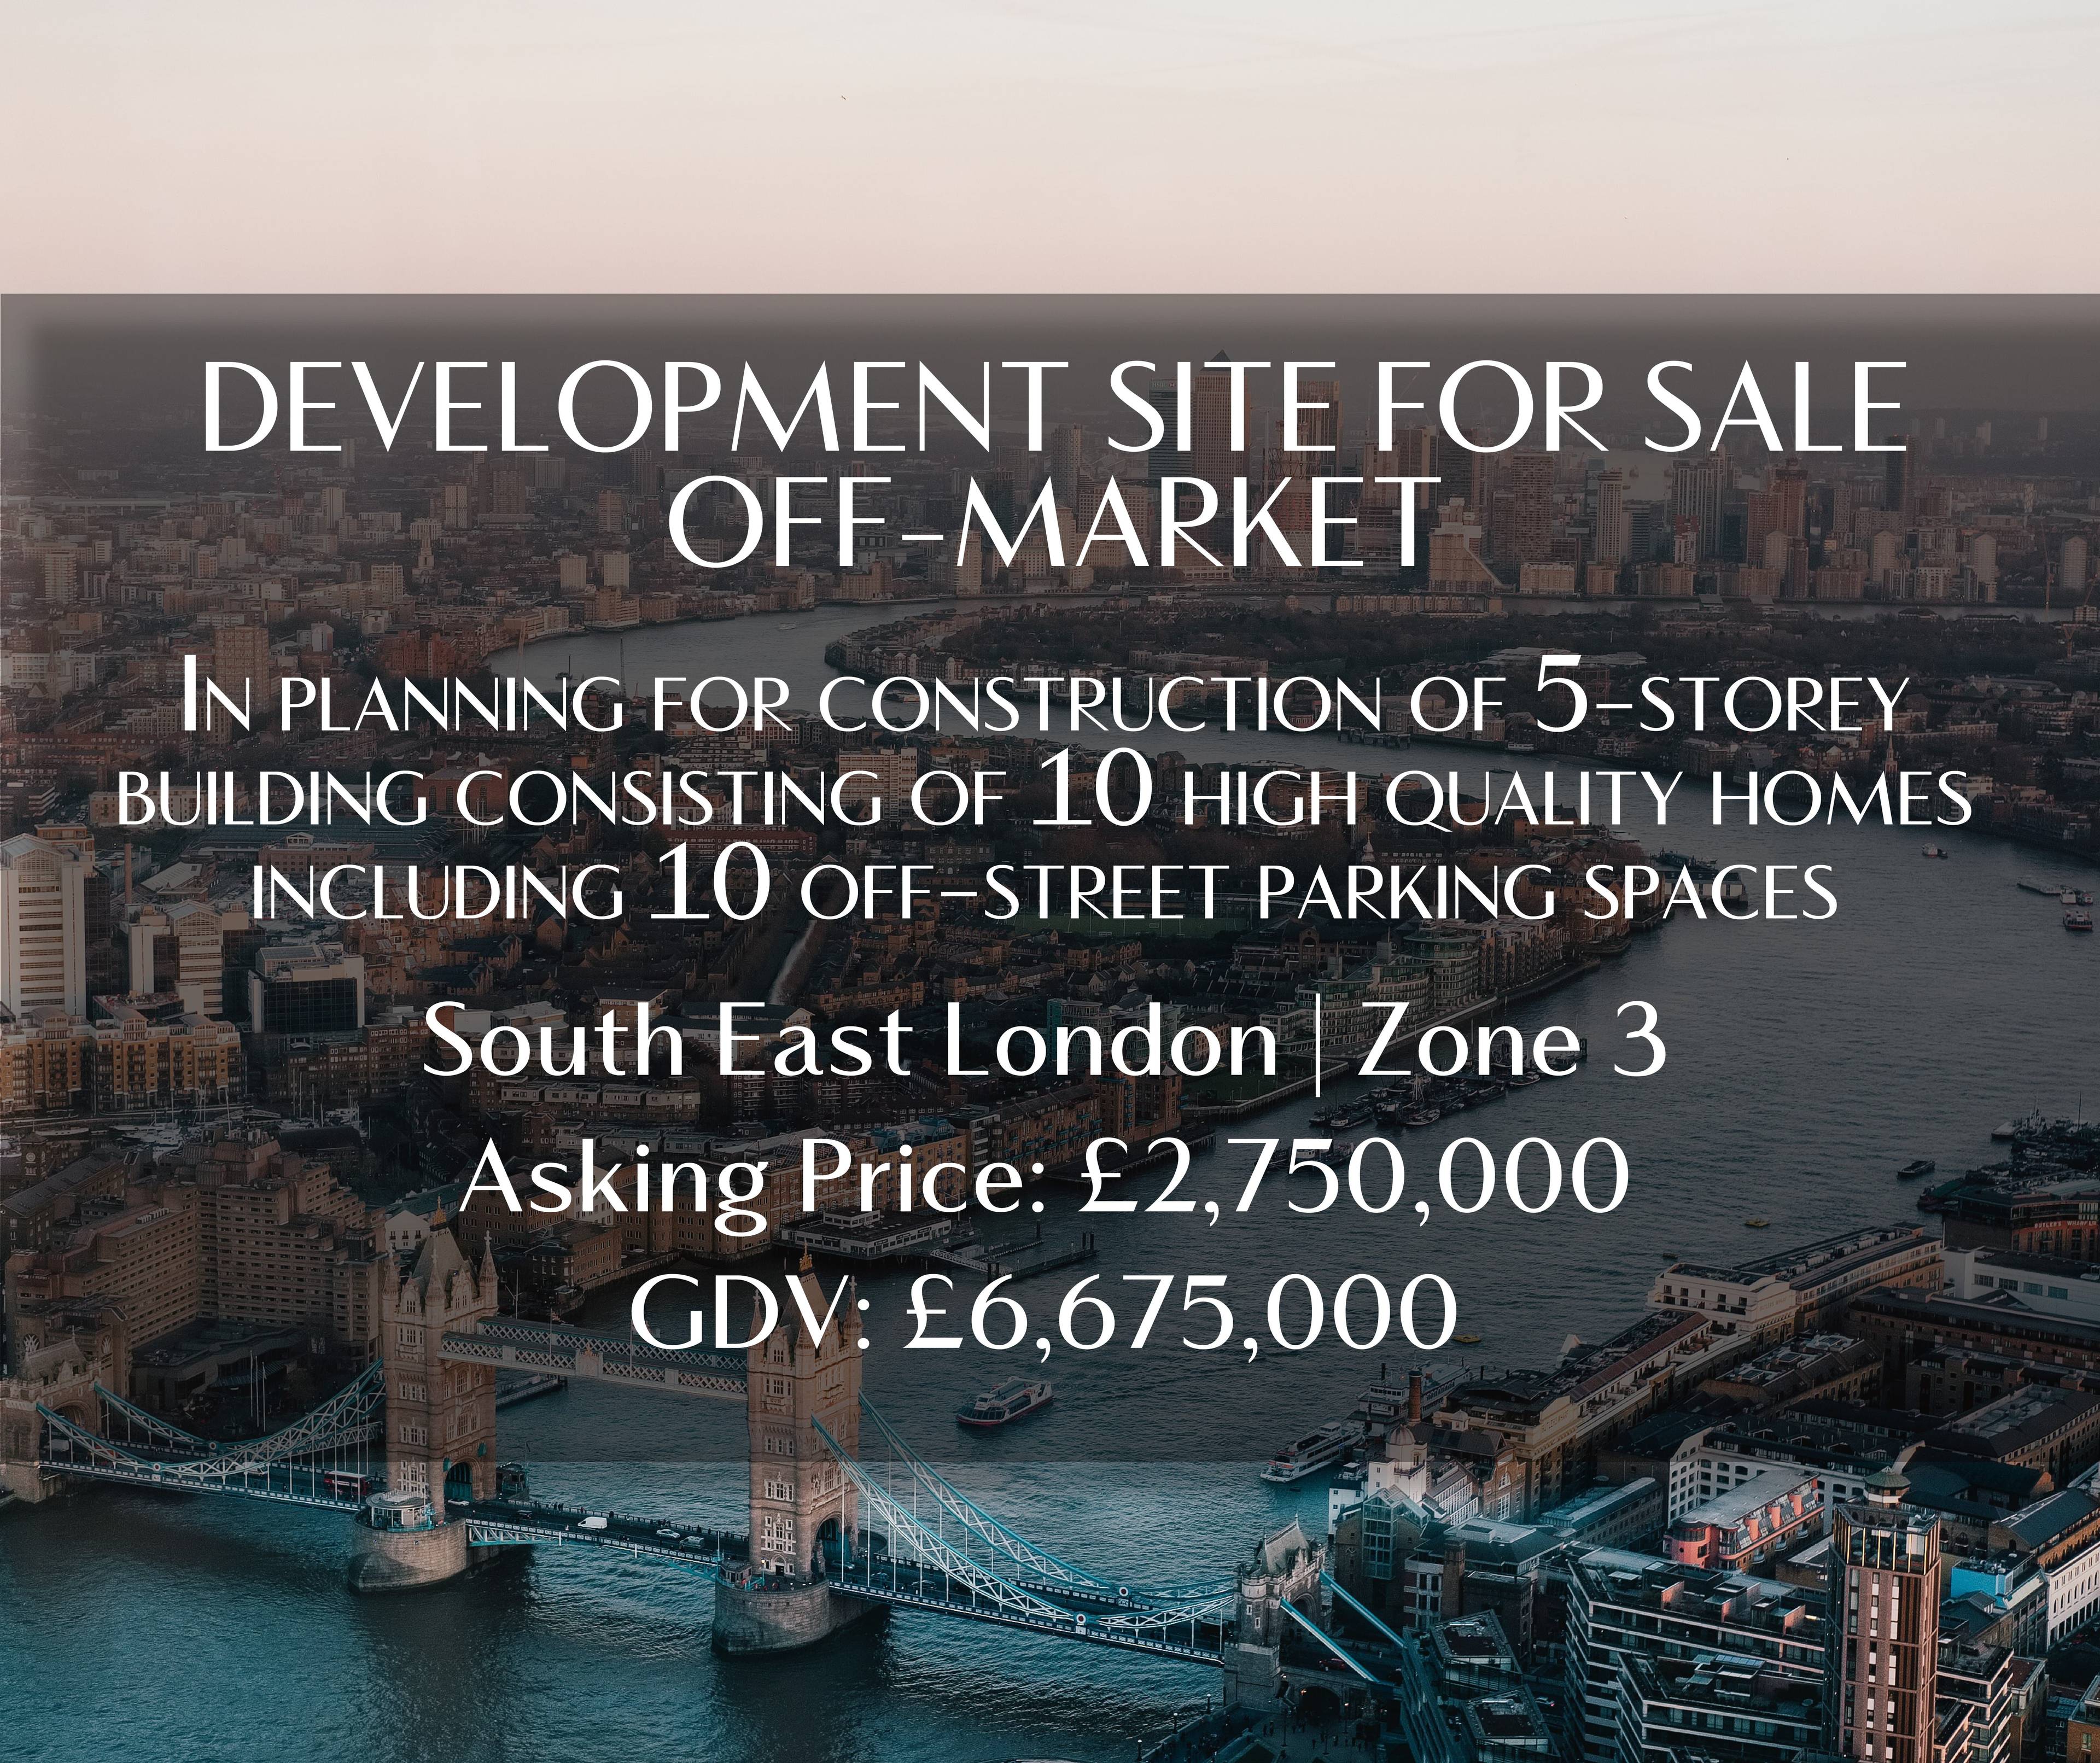 Development opportunity. Site with a potential to build 10 high quality homes in a desirable South East London location.